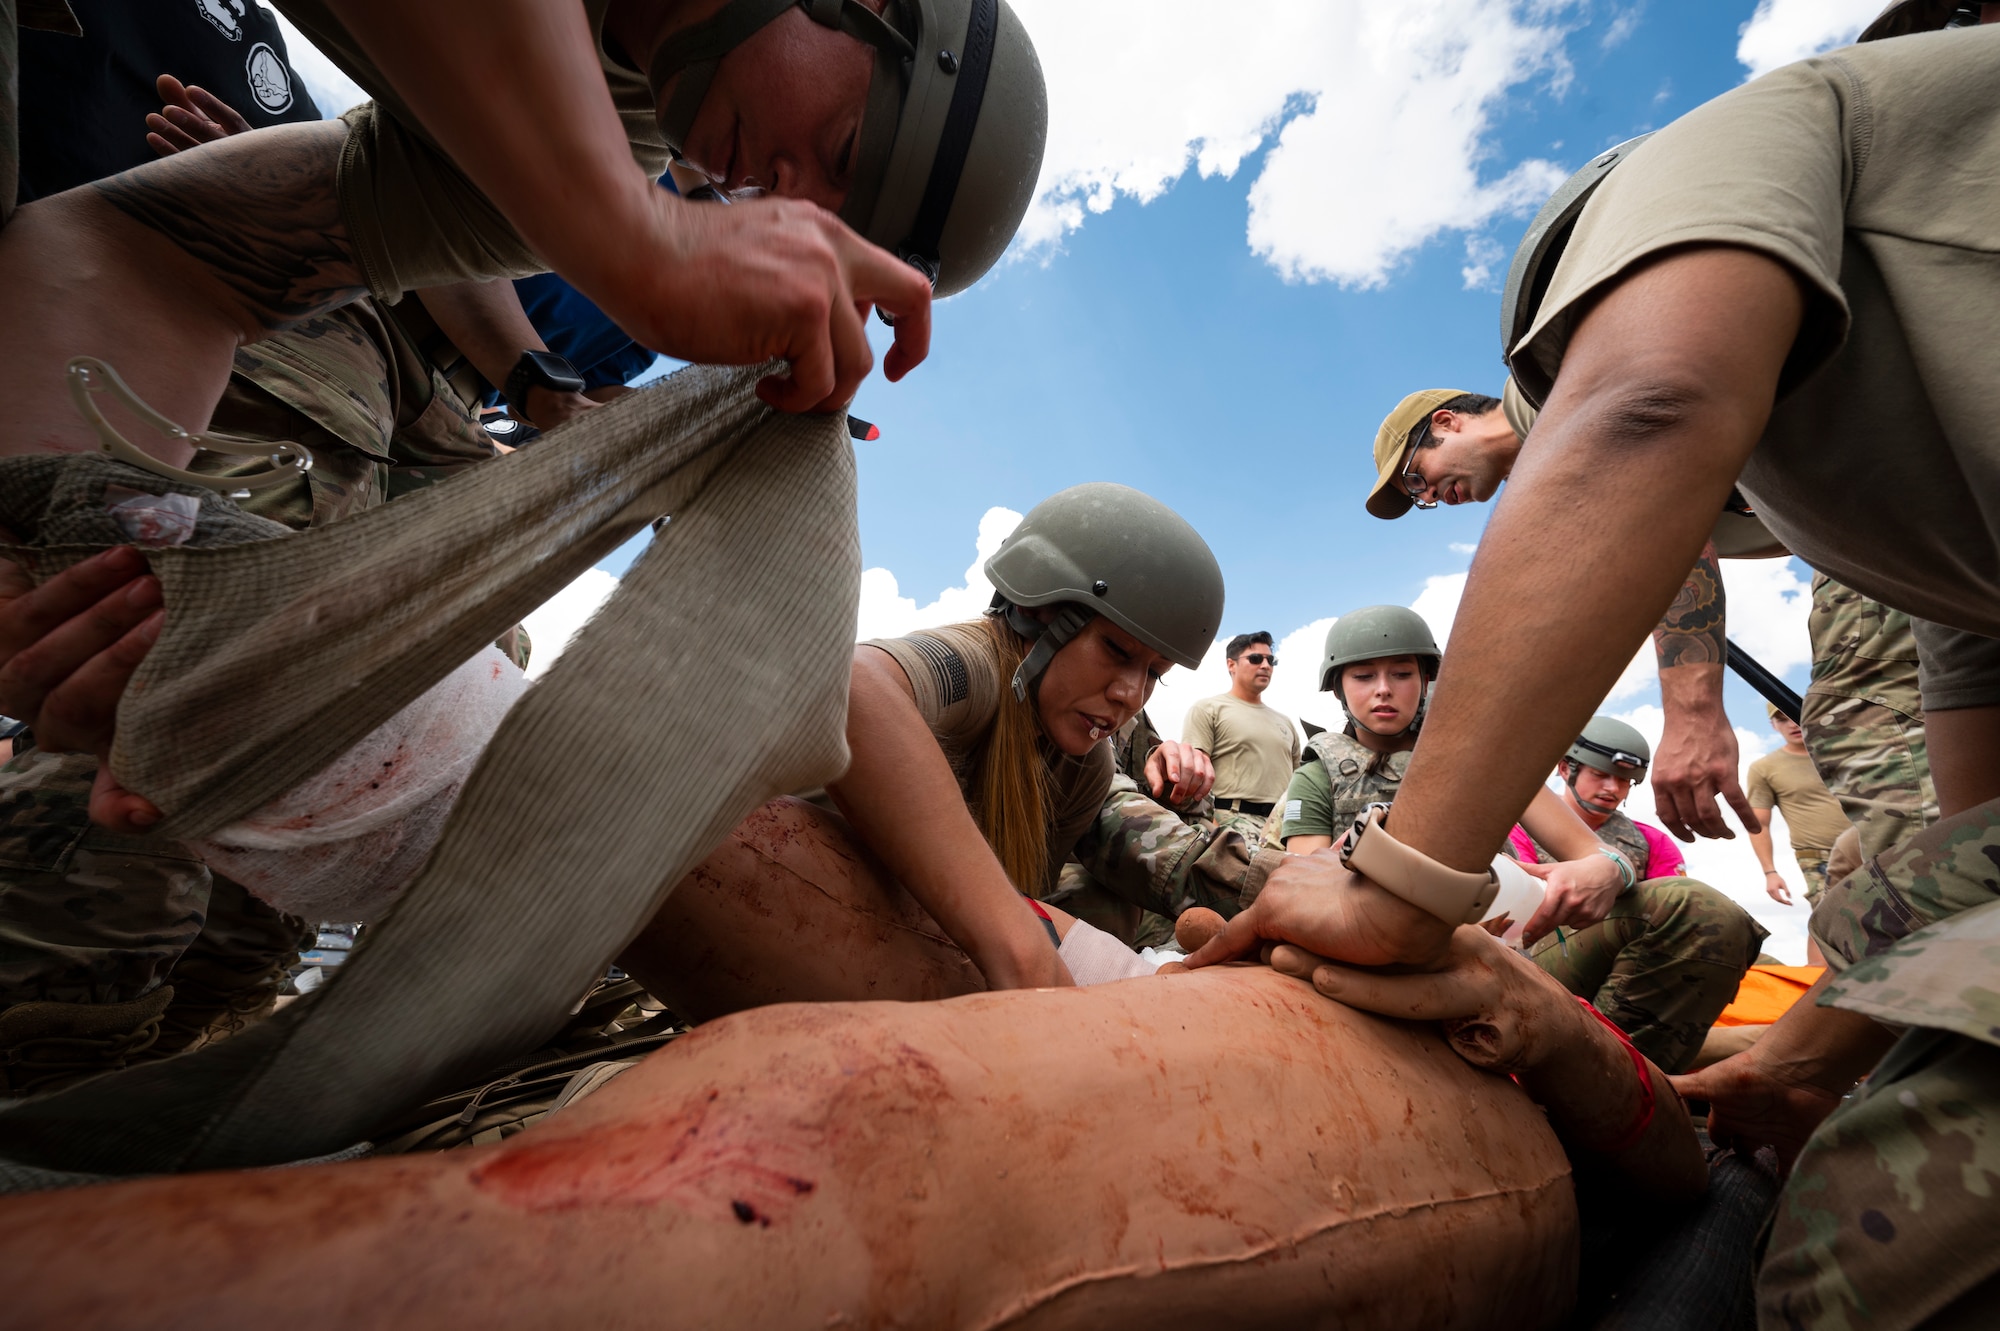 A group of people in helmets and tactical vests apply pressure to a medical mannequin's leg to stop simulated bleeding.